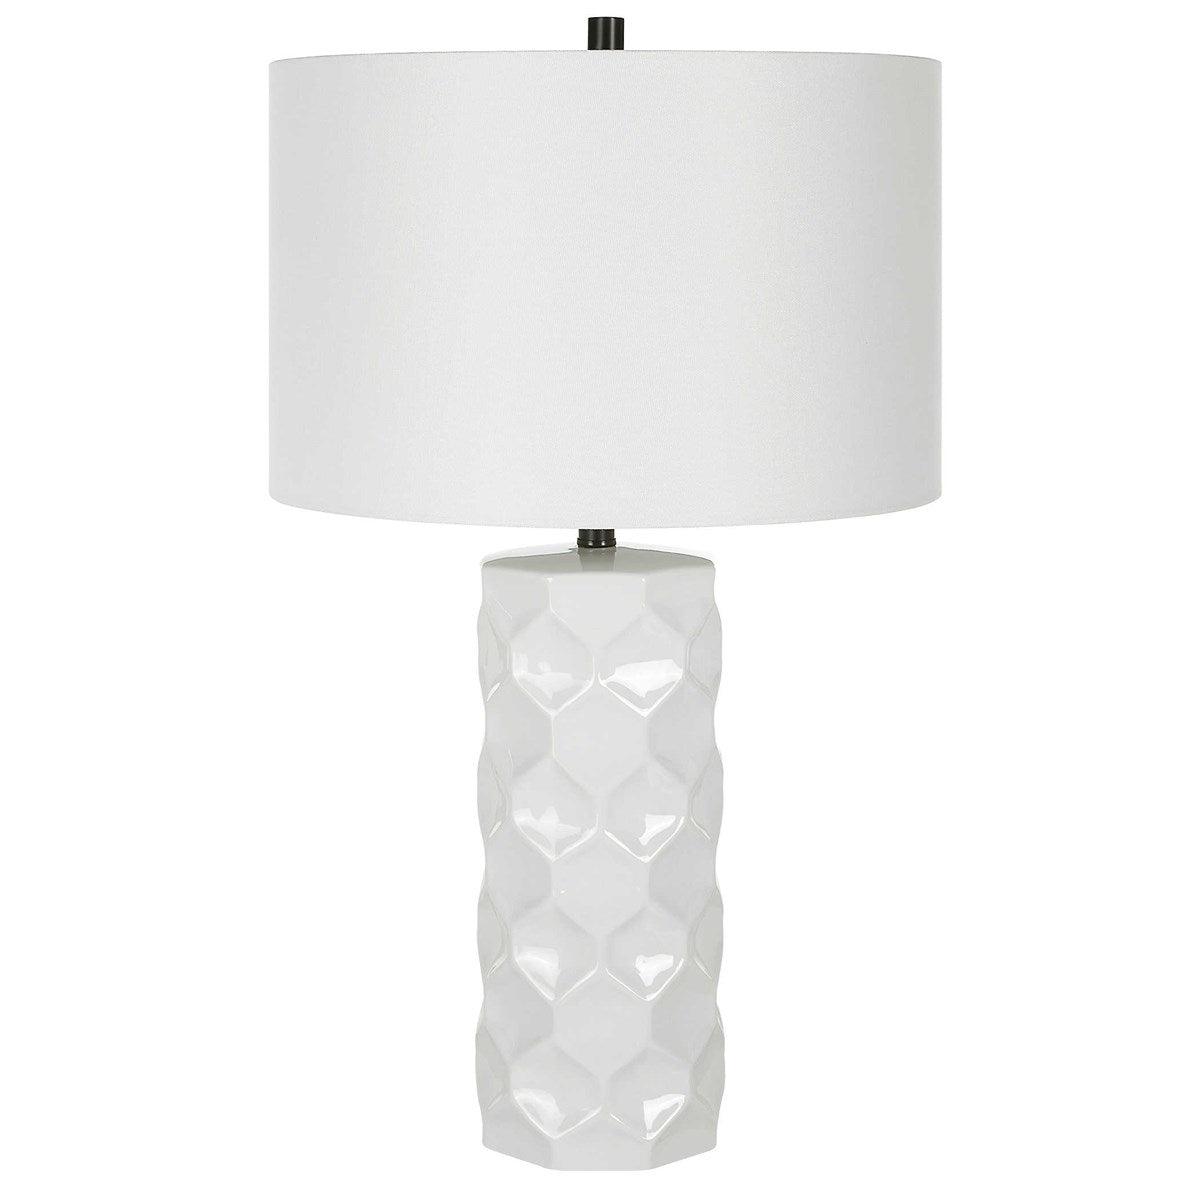 The Uttermost - Honeycomb Table Lamp - 30181-1 | Montreal Lighting & Hardware